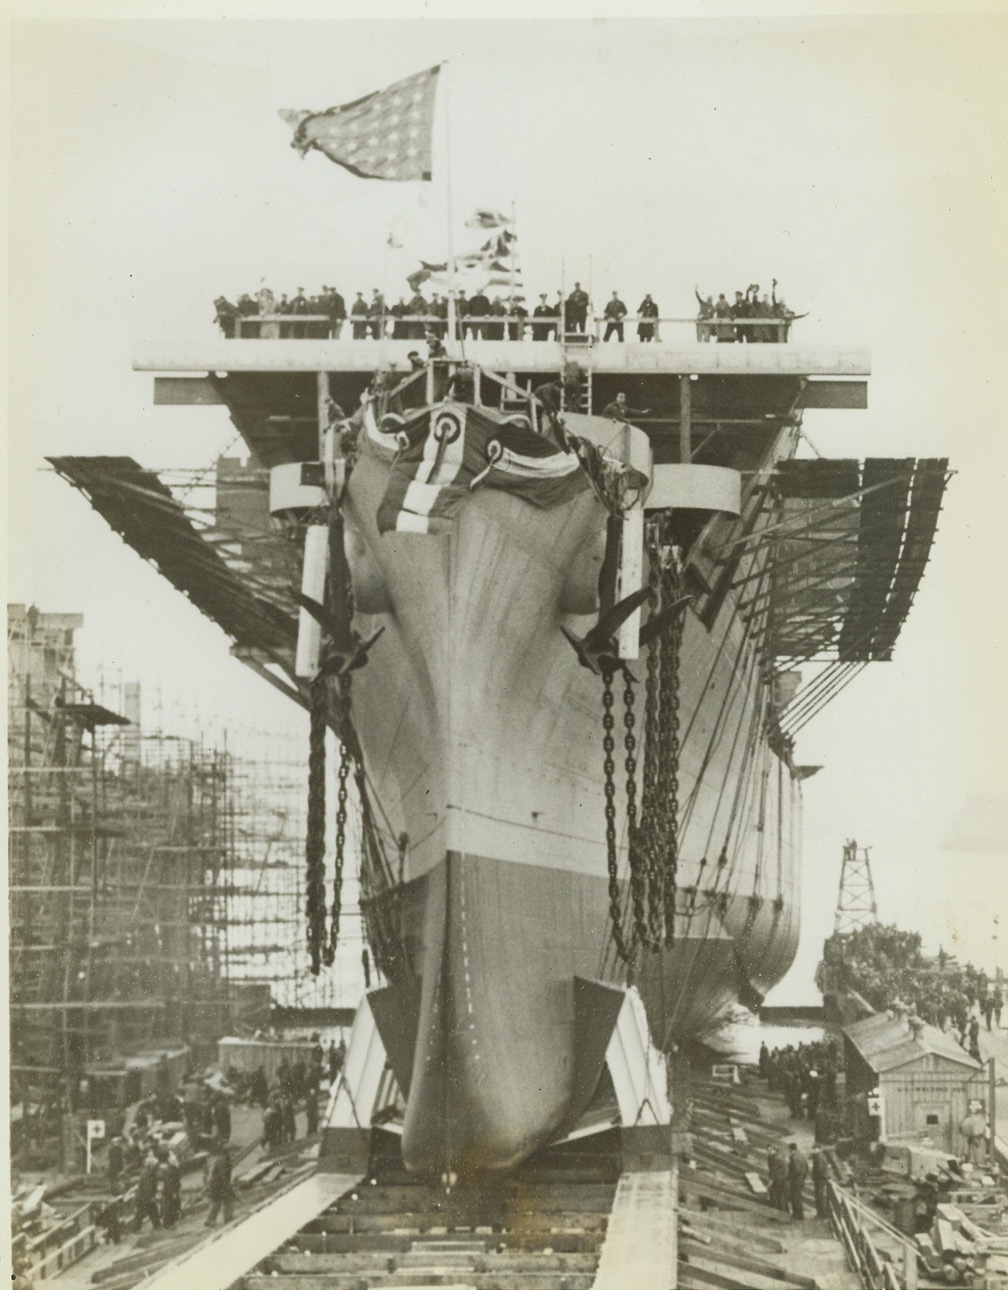 “Cowpens” Goes Down the Ways, 1/17/1943. Camden, N.J.—The U.S.S. Cowpens, an aircraft carrier named in memory of a Revolutionary War battle fought at Cowpens, S.C., goes down the ways at the New York Shipbuilding Corps Yards in Camden. Launched on Jan. 17, the Cowpens is the fourth carrier to be launched by the corporation in 20 weeks. Mrs. Preston Lea Spruance, daughter of Admiral William F. Halsey, sponsored the vessel. Credit: ACME.;